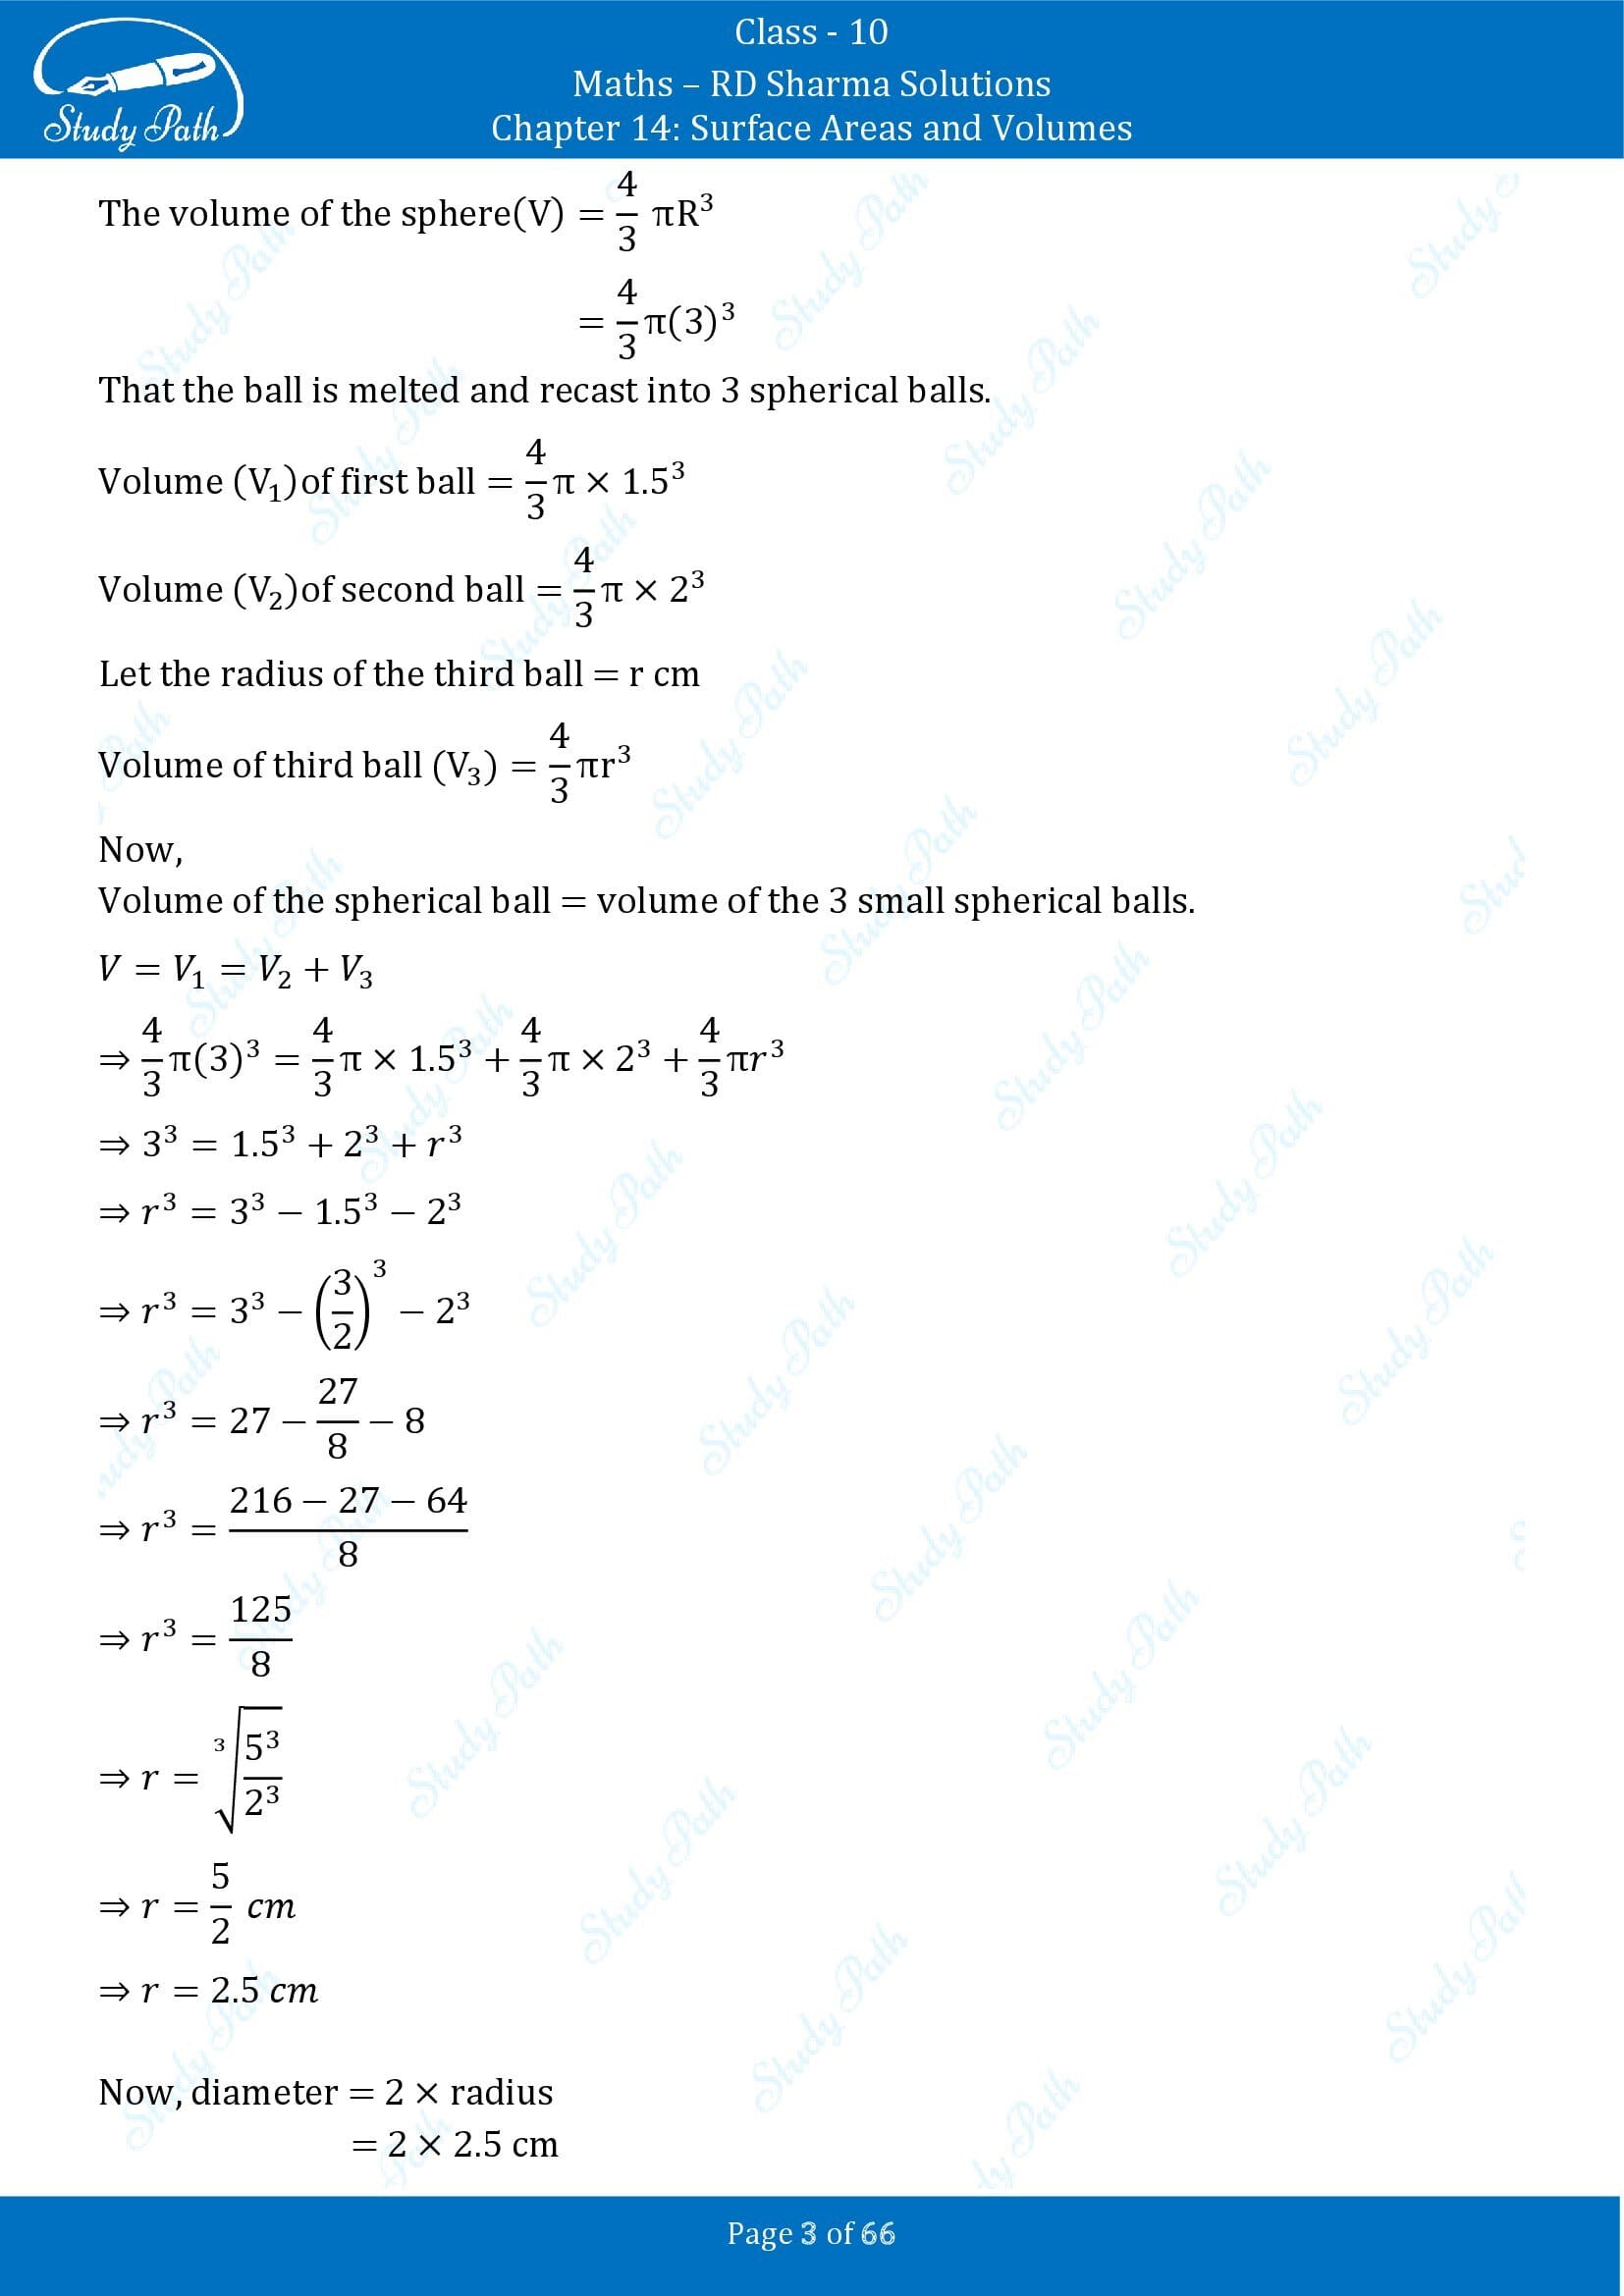 RD Sharma Solutions Class 10 Chapter 14 Surface Areas and Volumes Exercise 14.1 00003